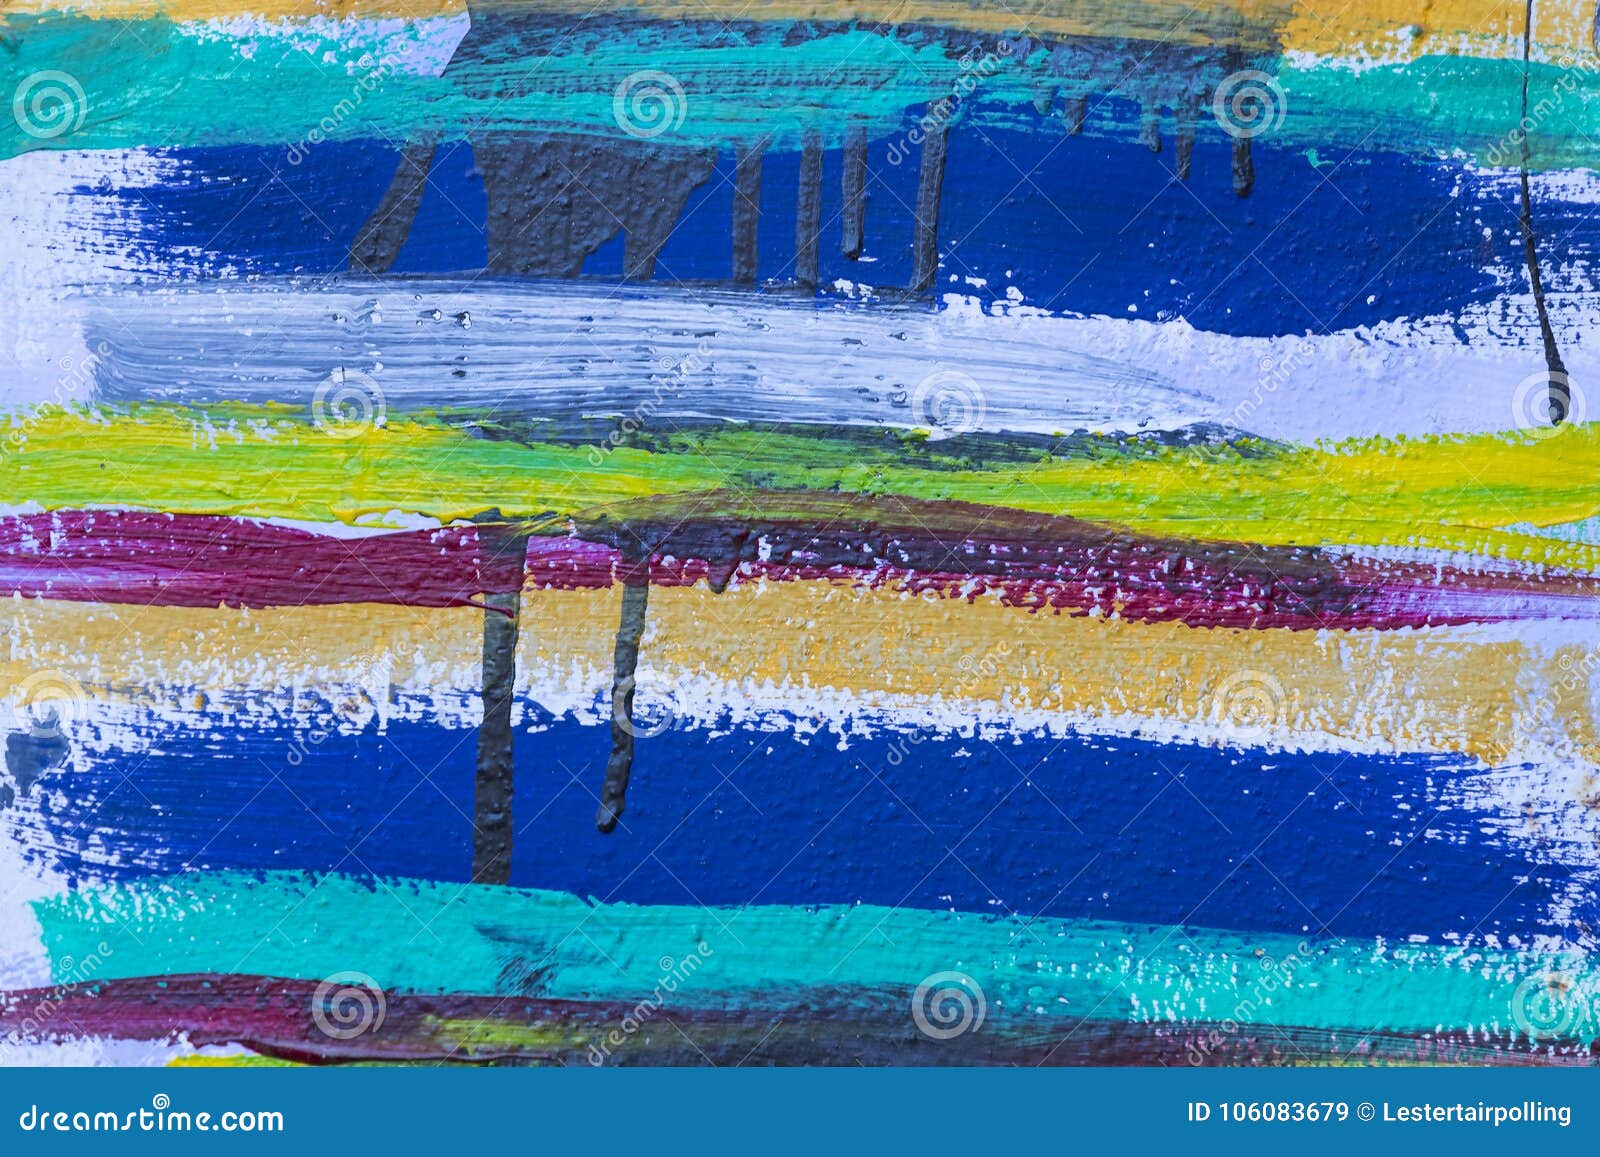 colored stripes background of acrylic paint